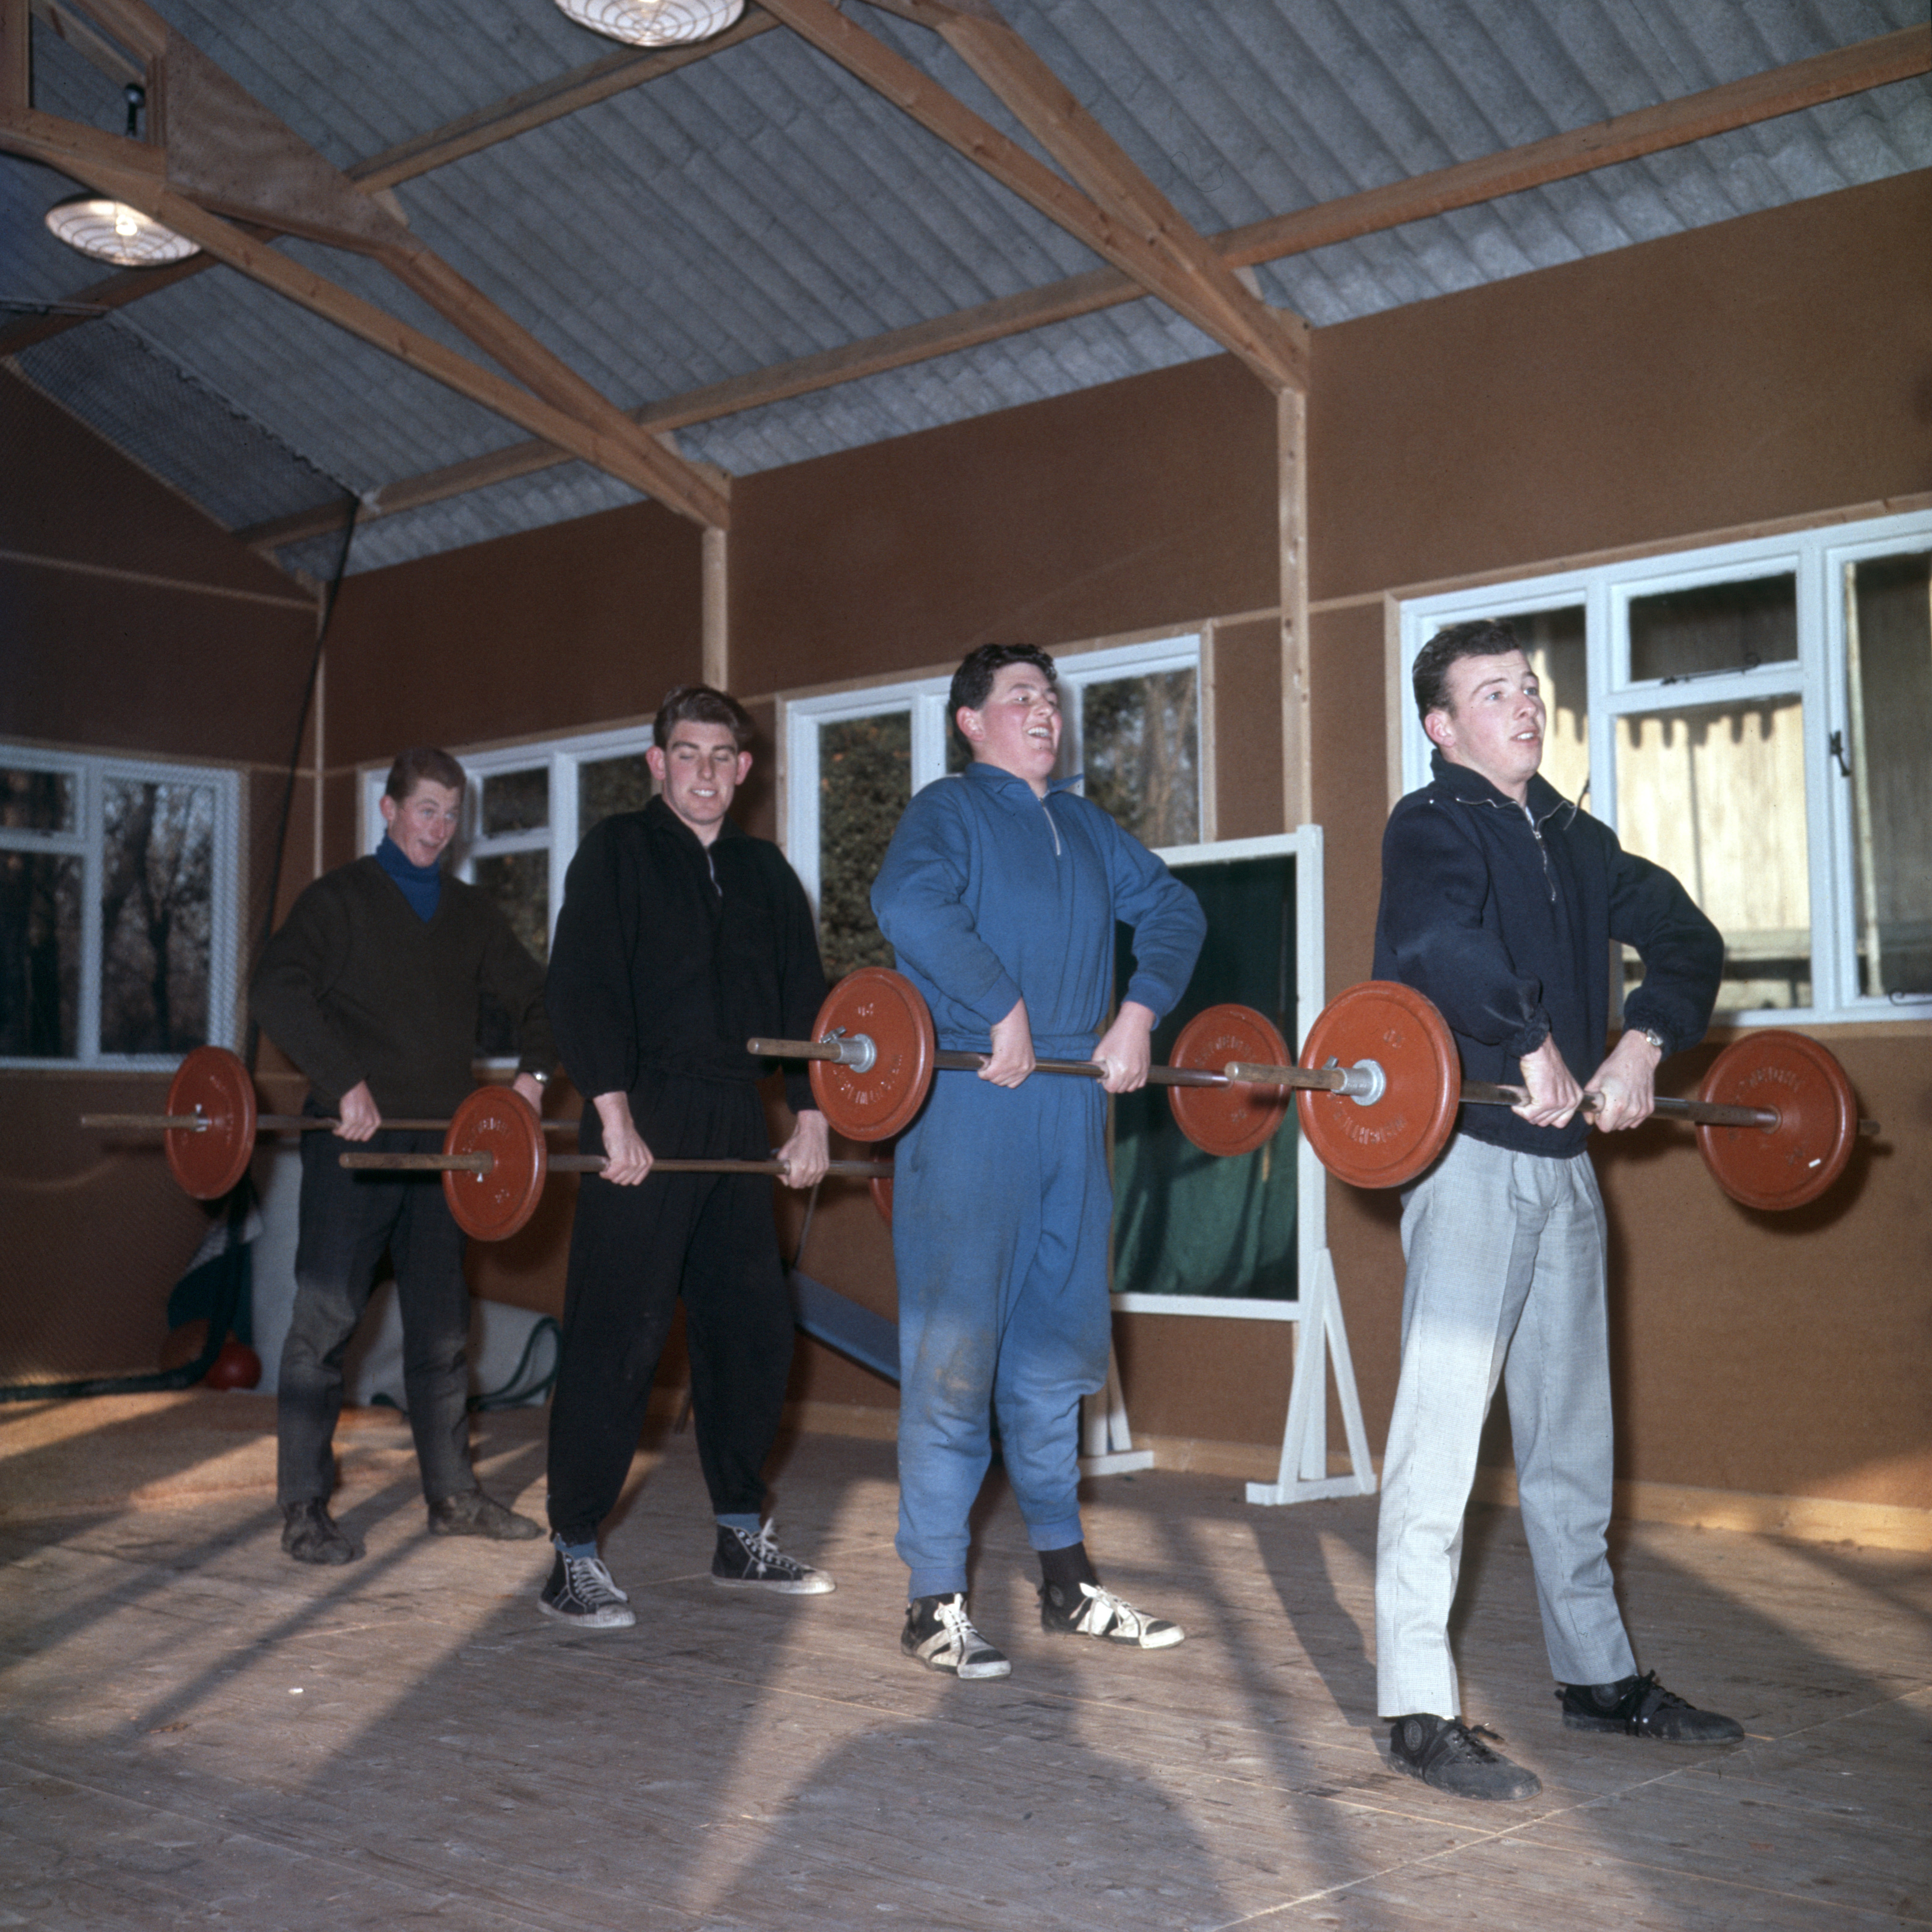 The Butten Boys, Britain's young golfing hopes, at weight training in a gymnasium at Sundridge Park in 1965 (PA)